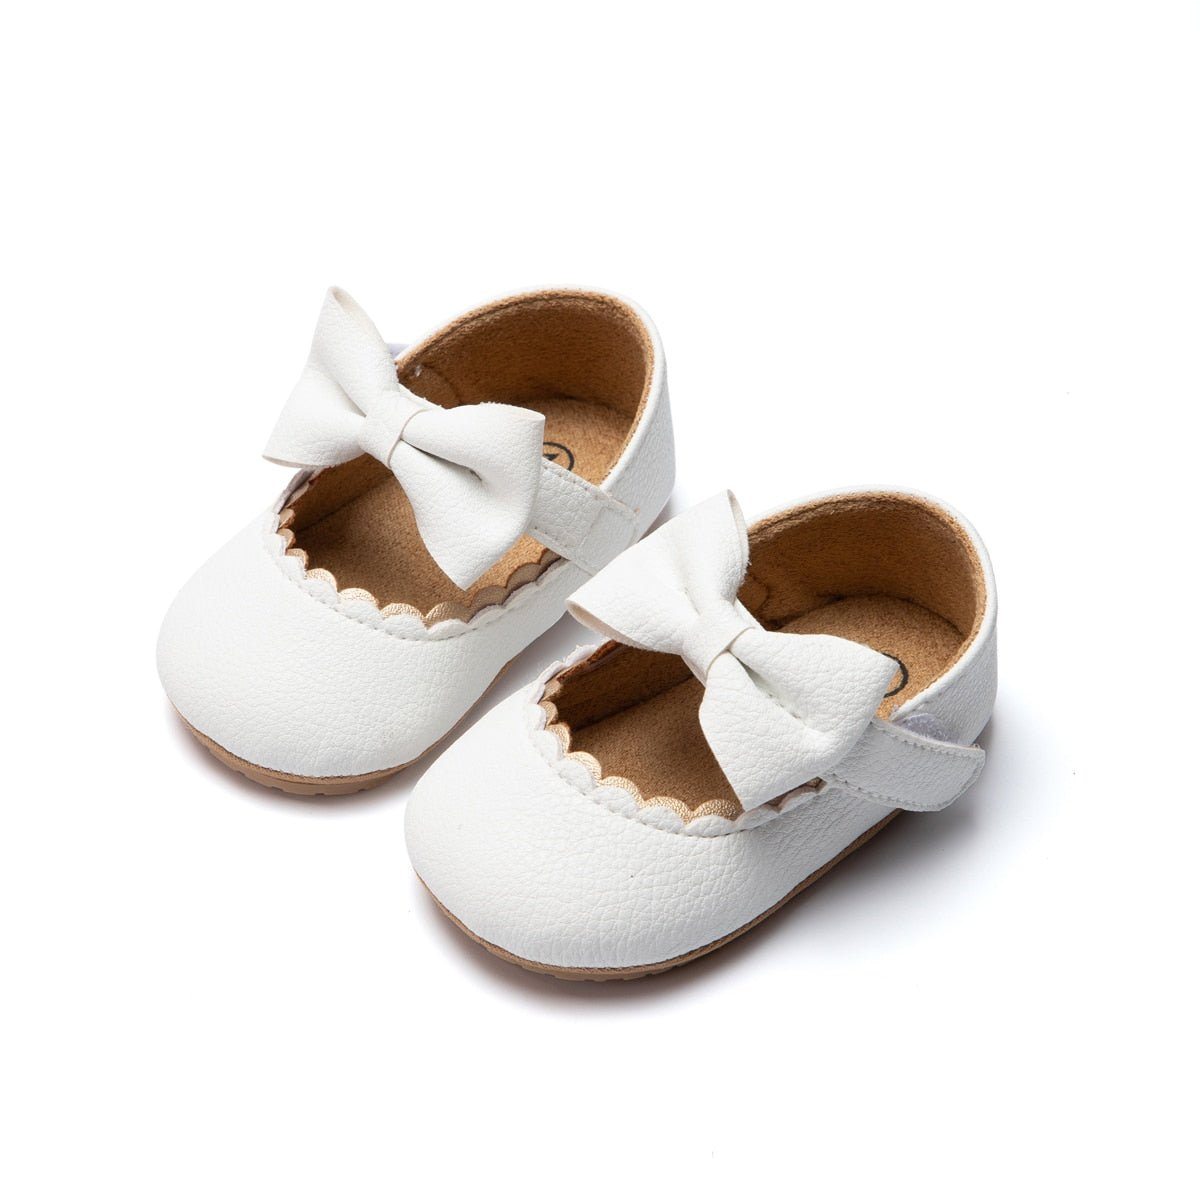 Baby Shoes for Sale - eBay